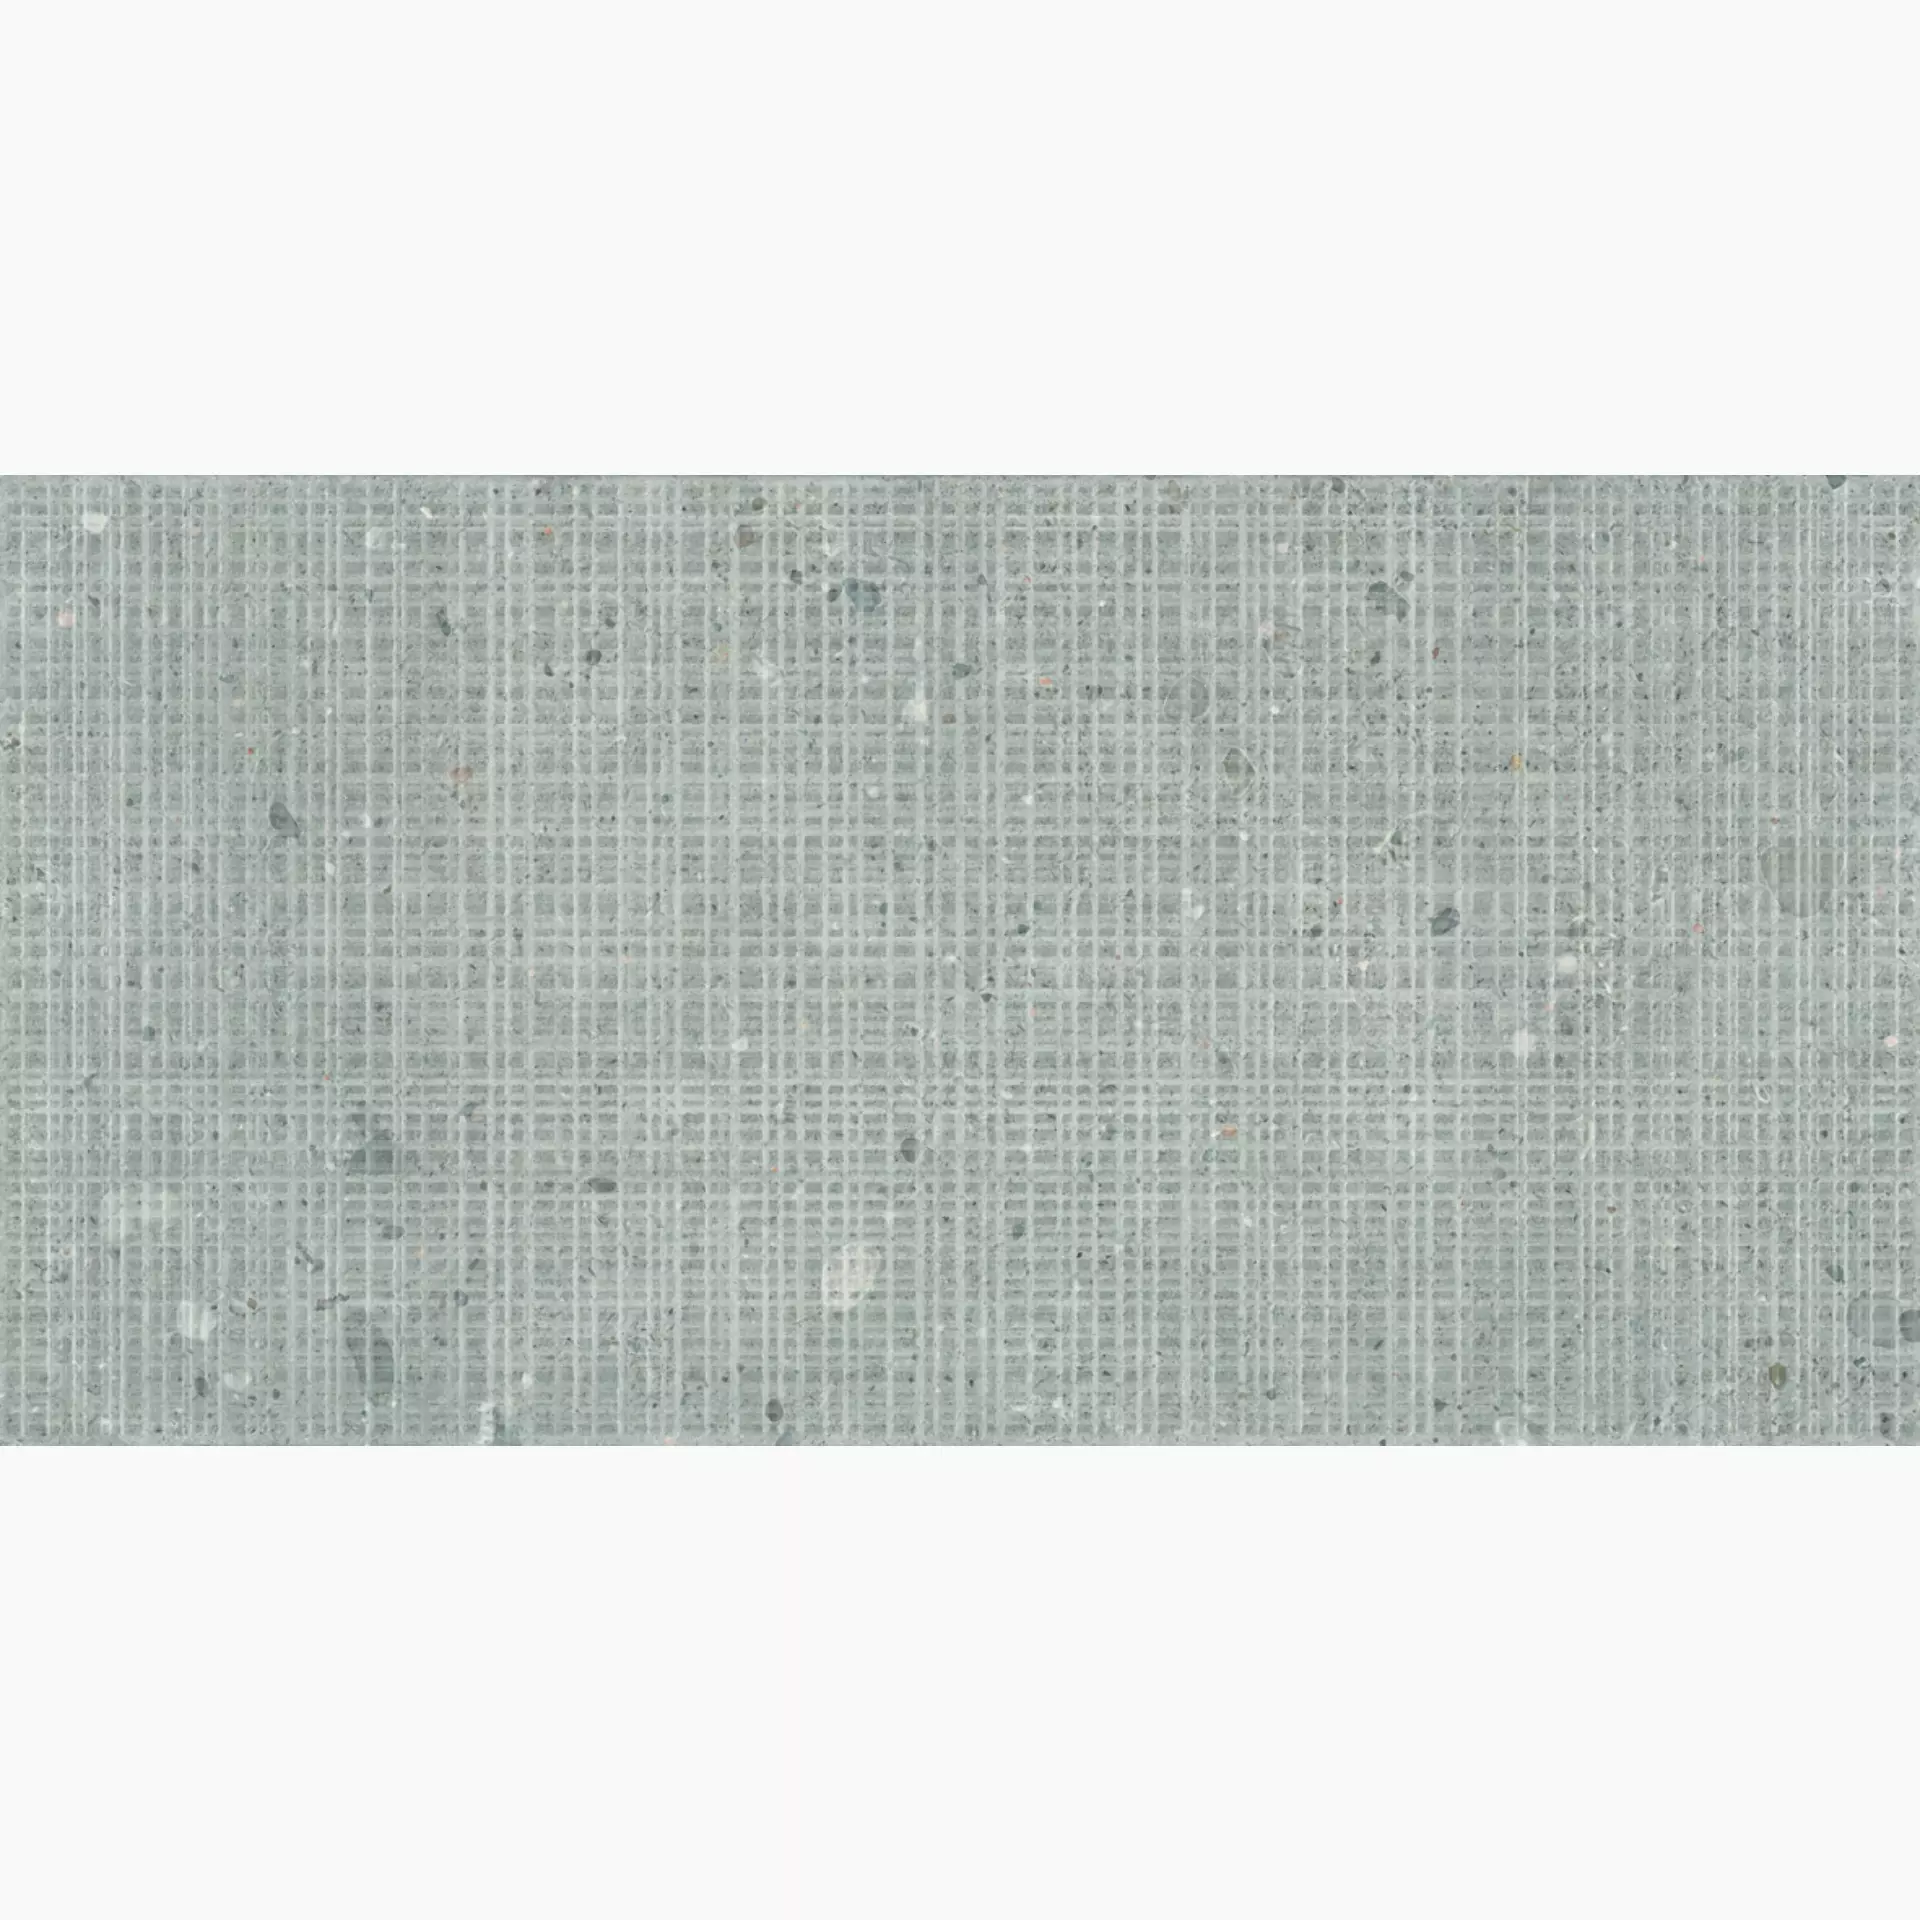 Provenza Ego Grigio Naturale Trame EGR3 60x120cm rectified 9,5mm